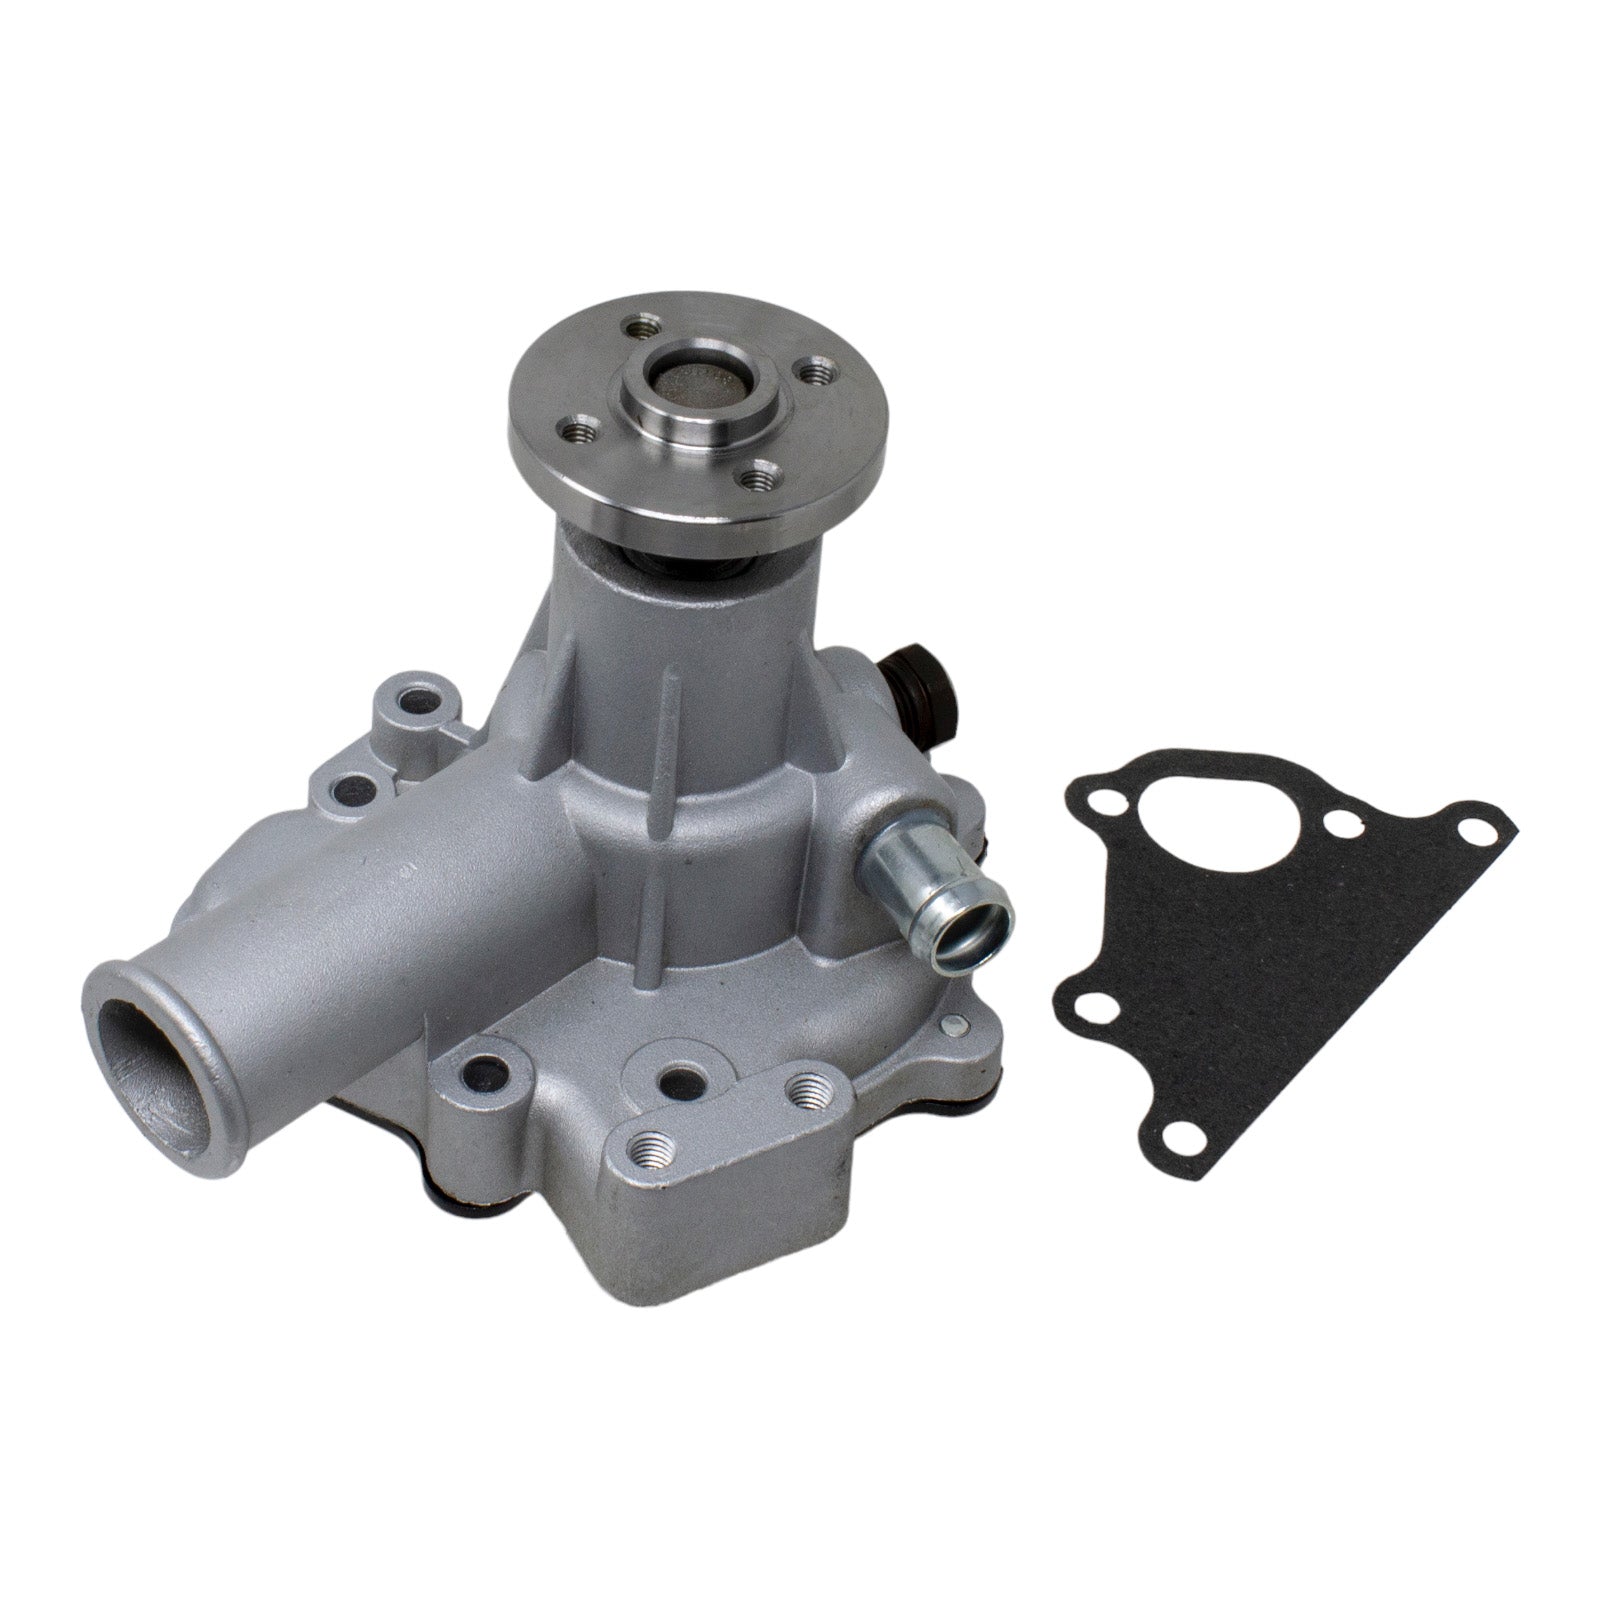 Duraforce SBA145017670, Water Pump For Ford